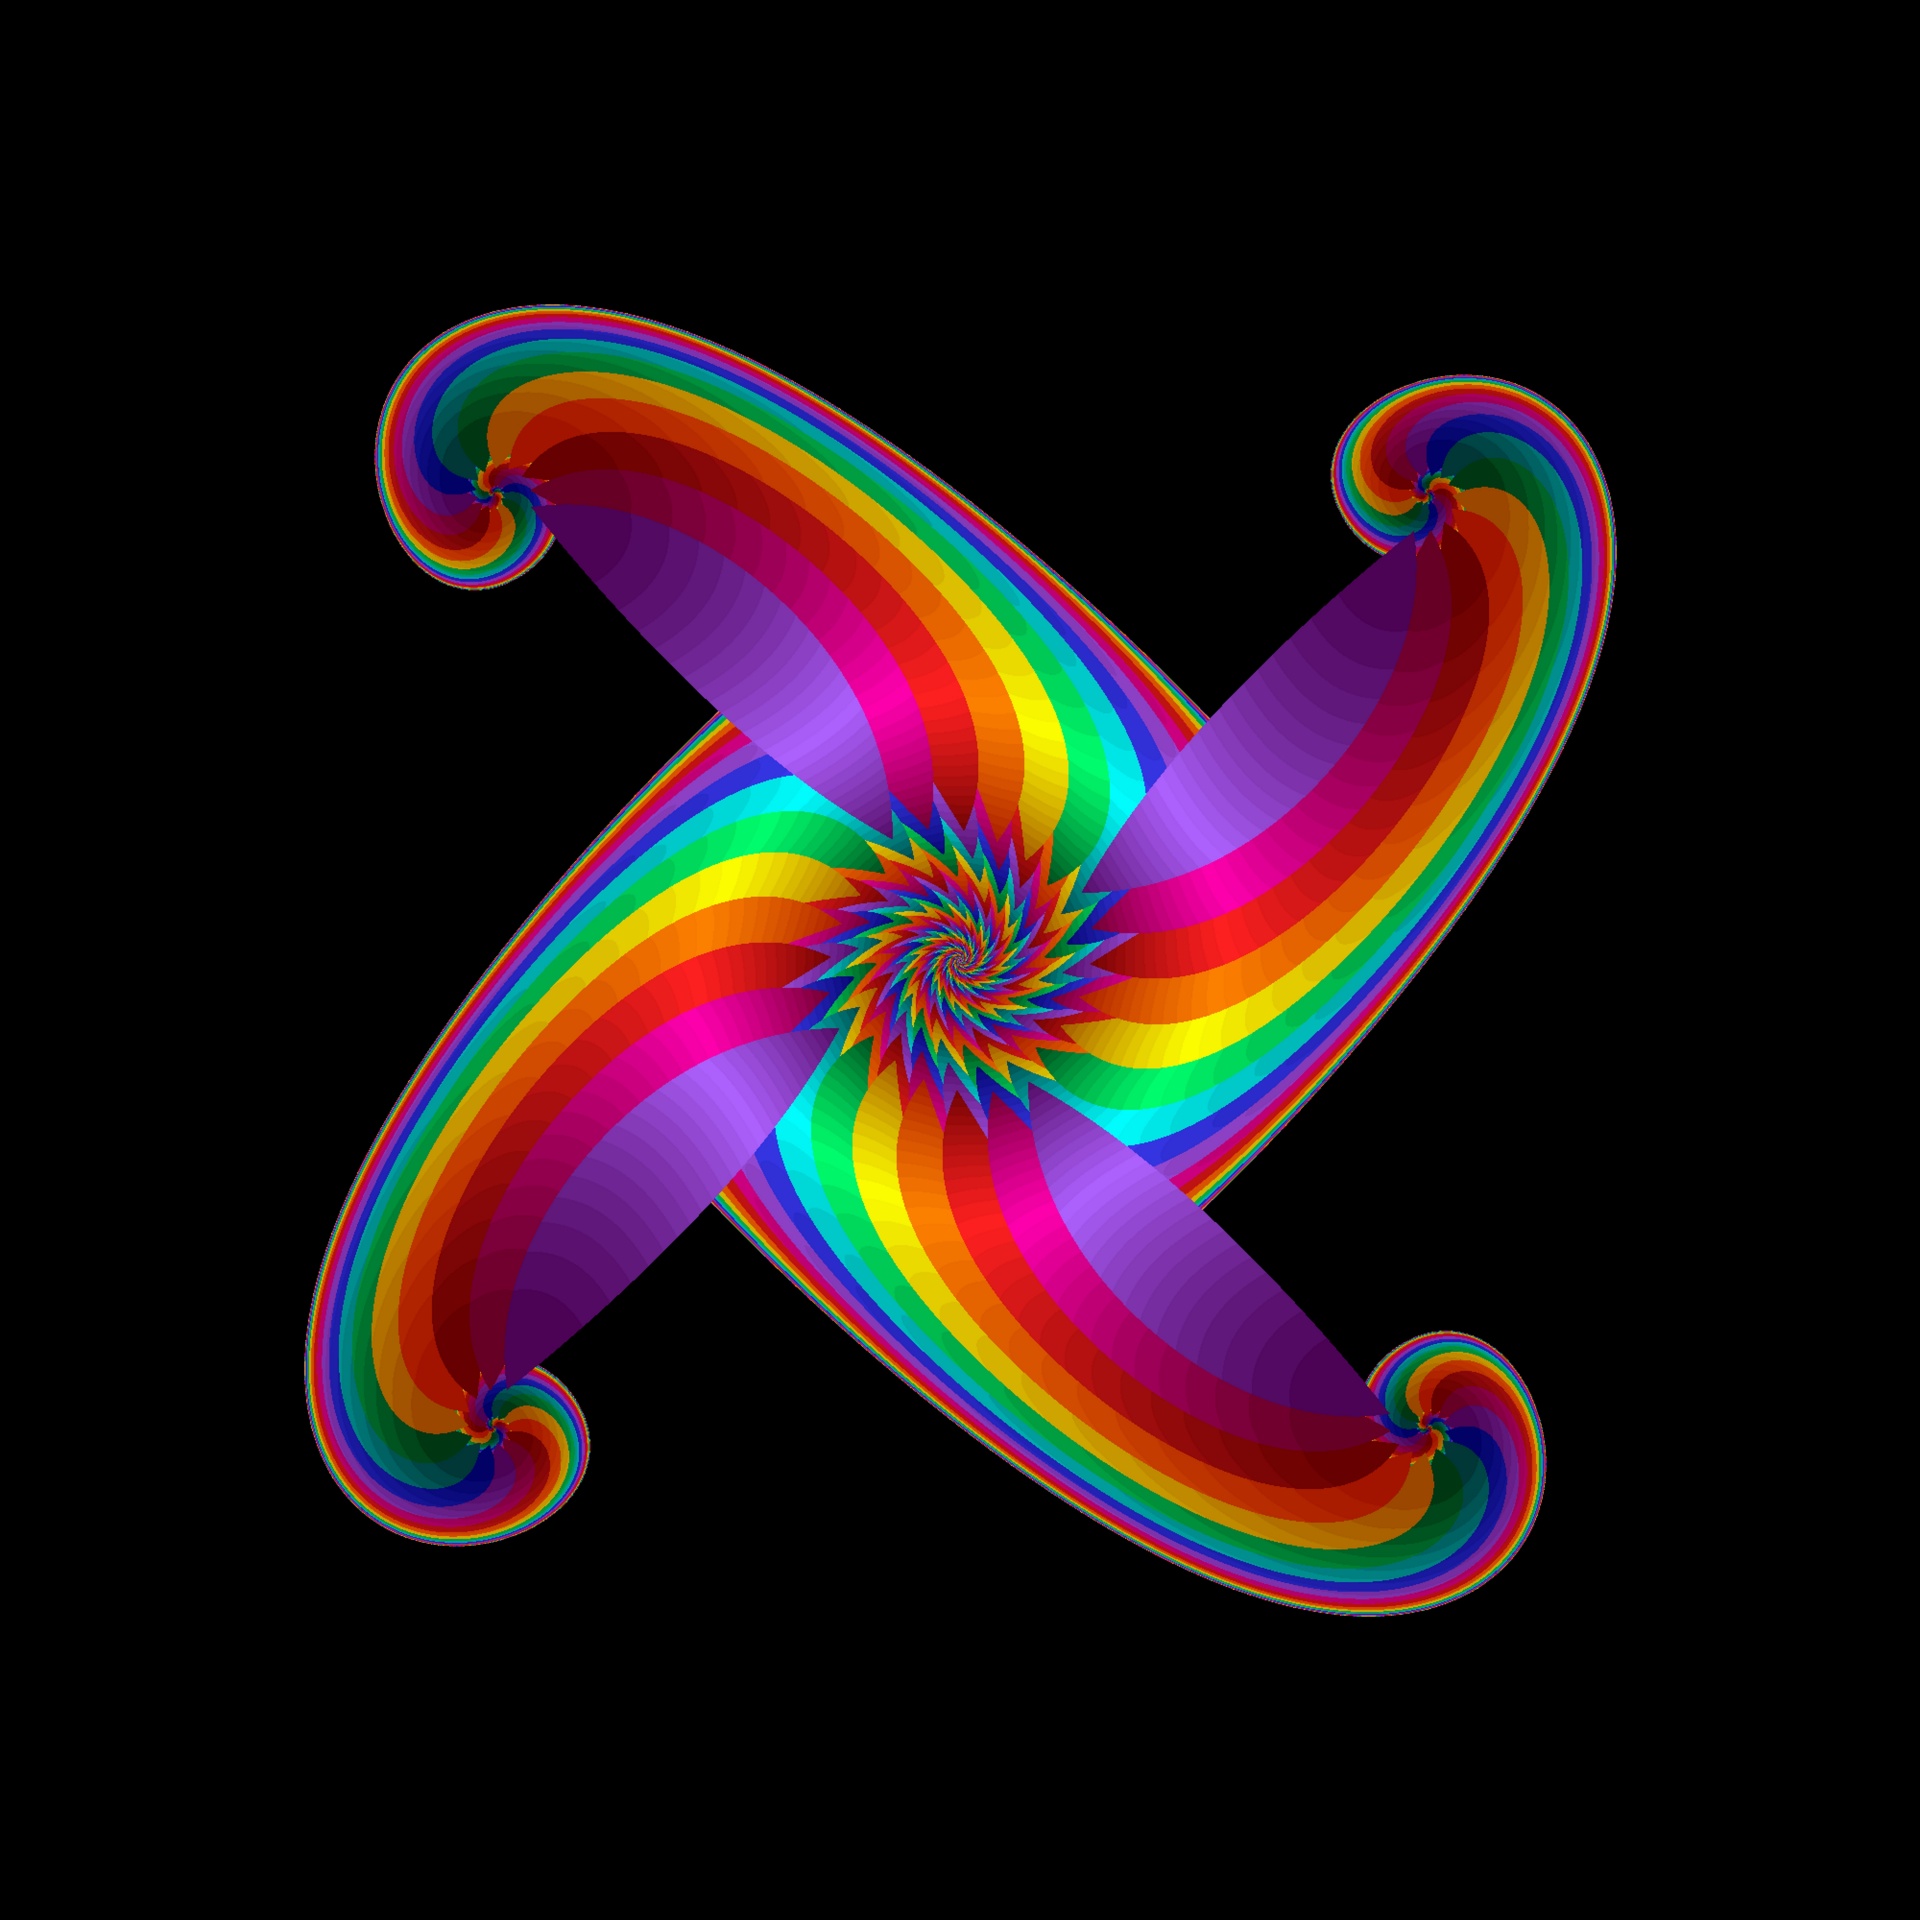 wallpaper with rainbow spinner on black background